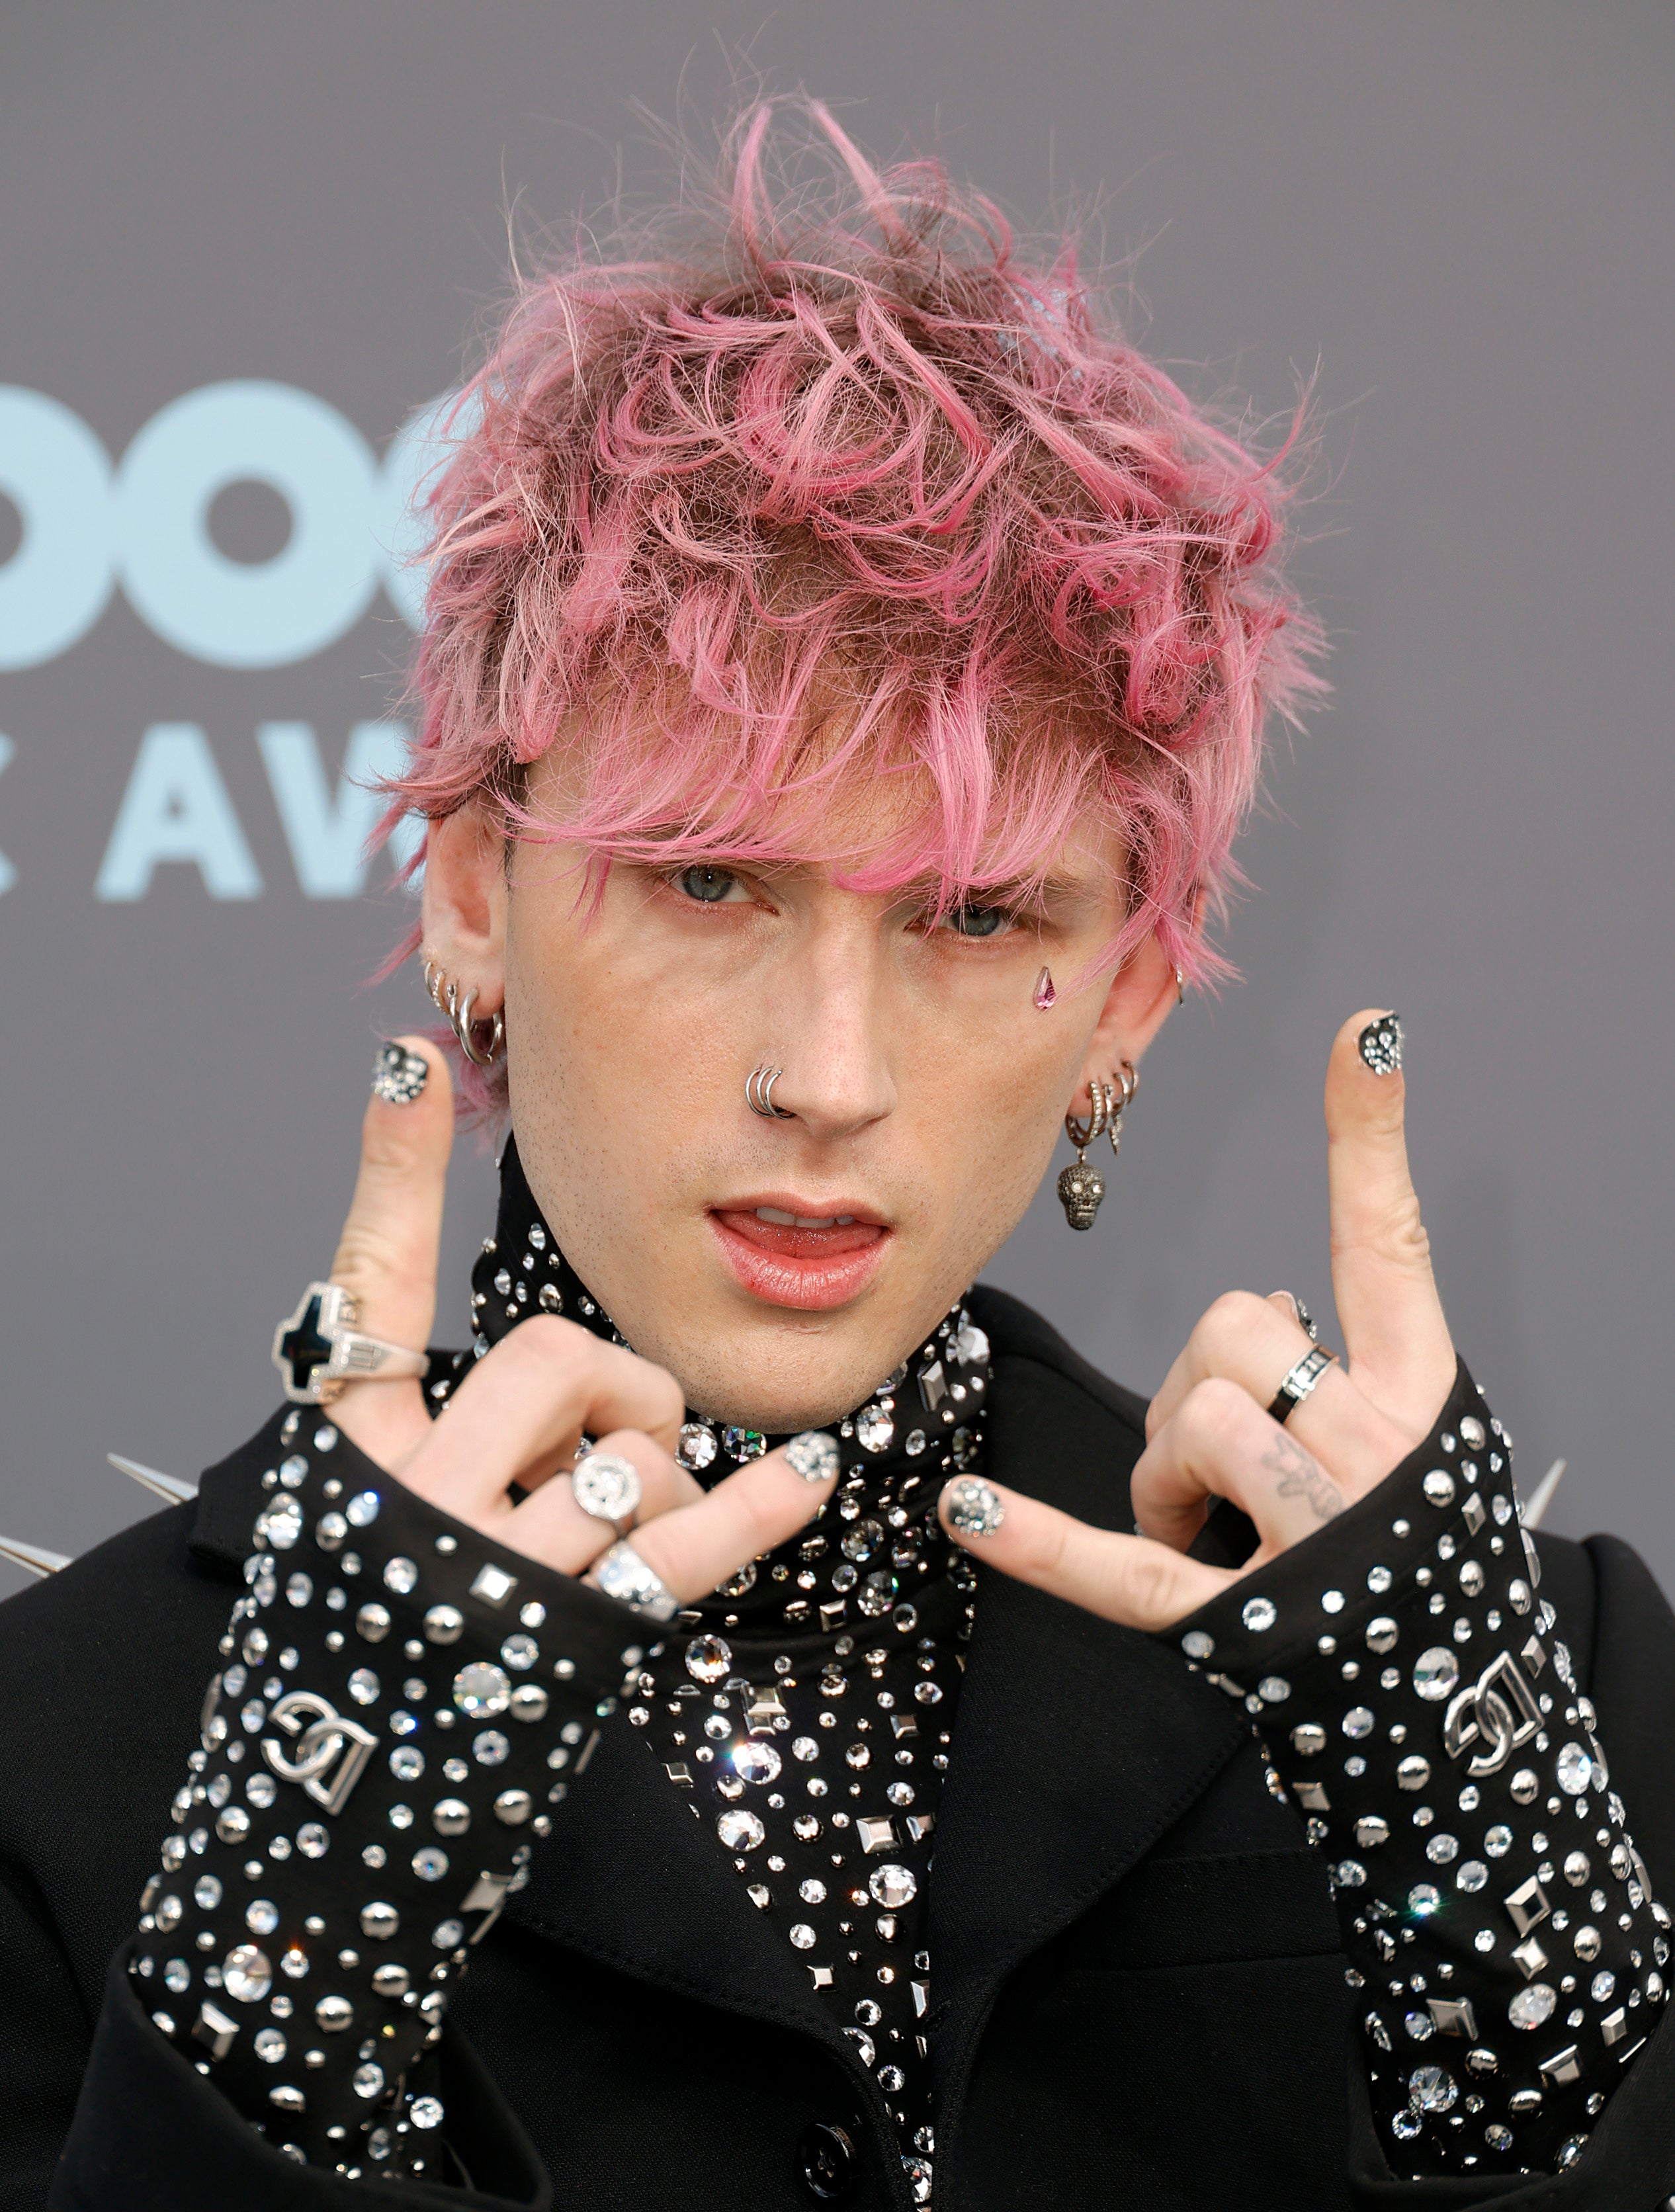 Machine Gun Kelly's Life In Pink' Gives Never Before Seen Look At Musician's Personal Life